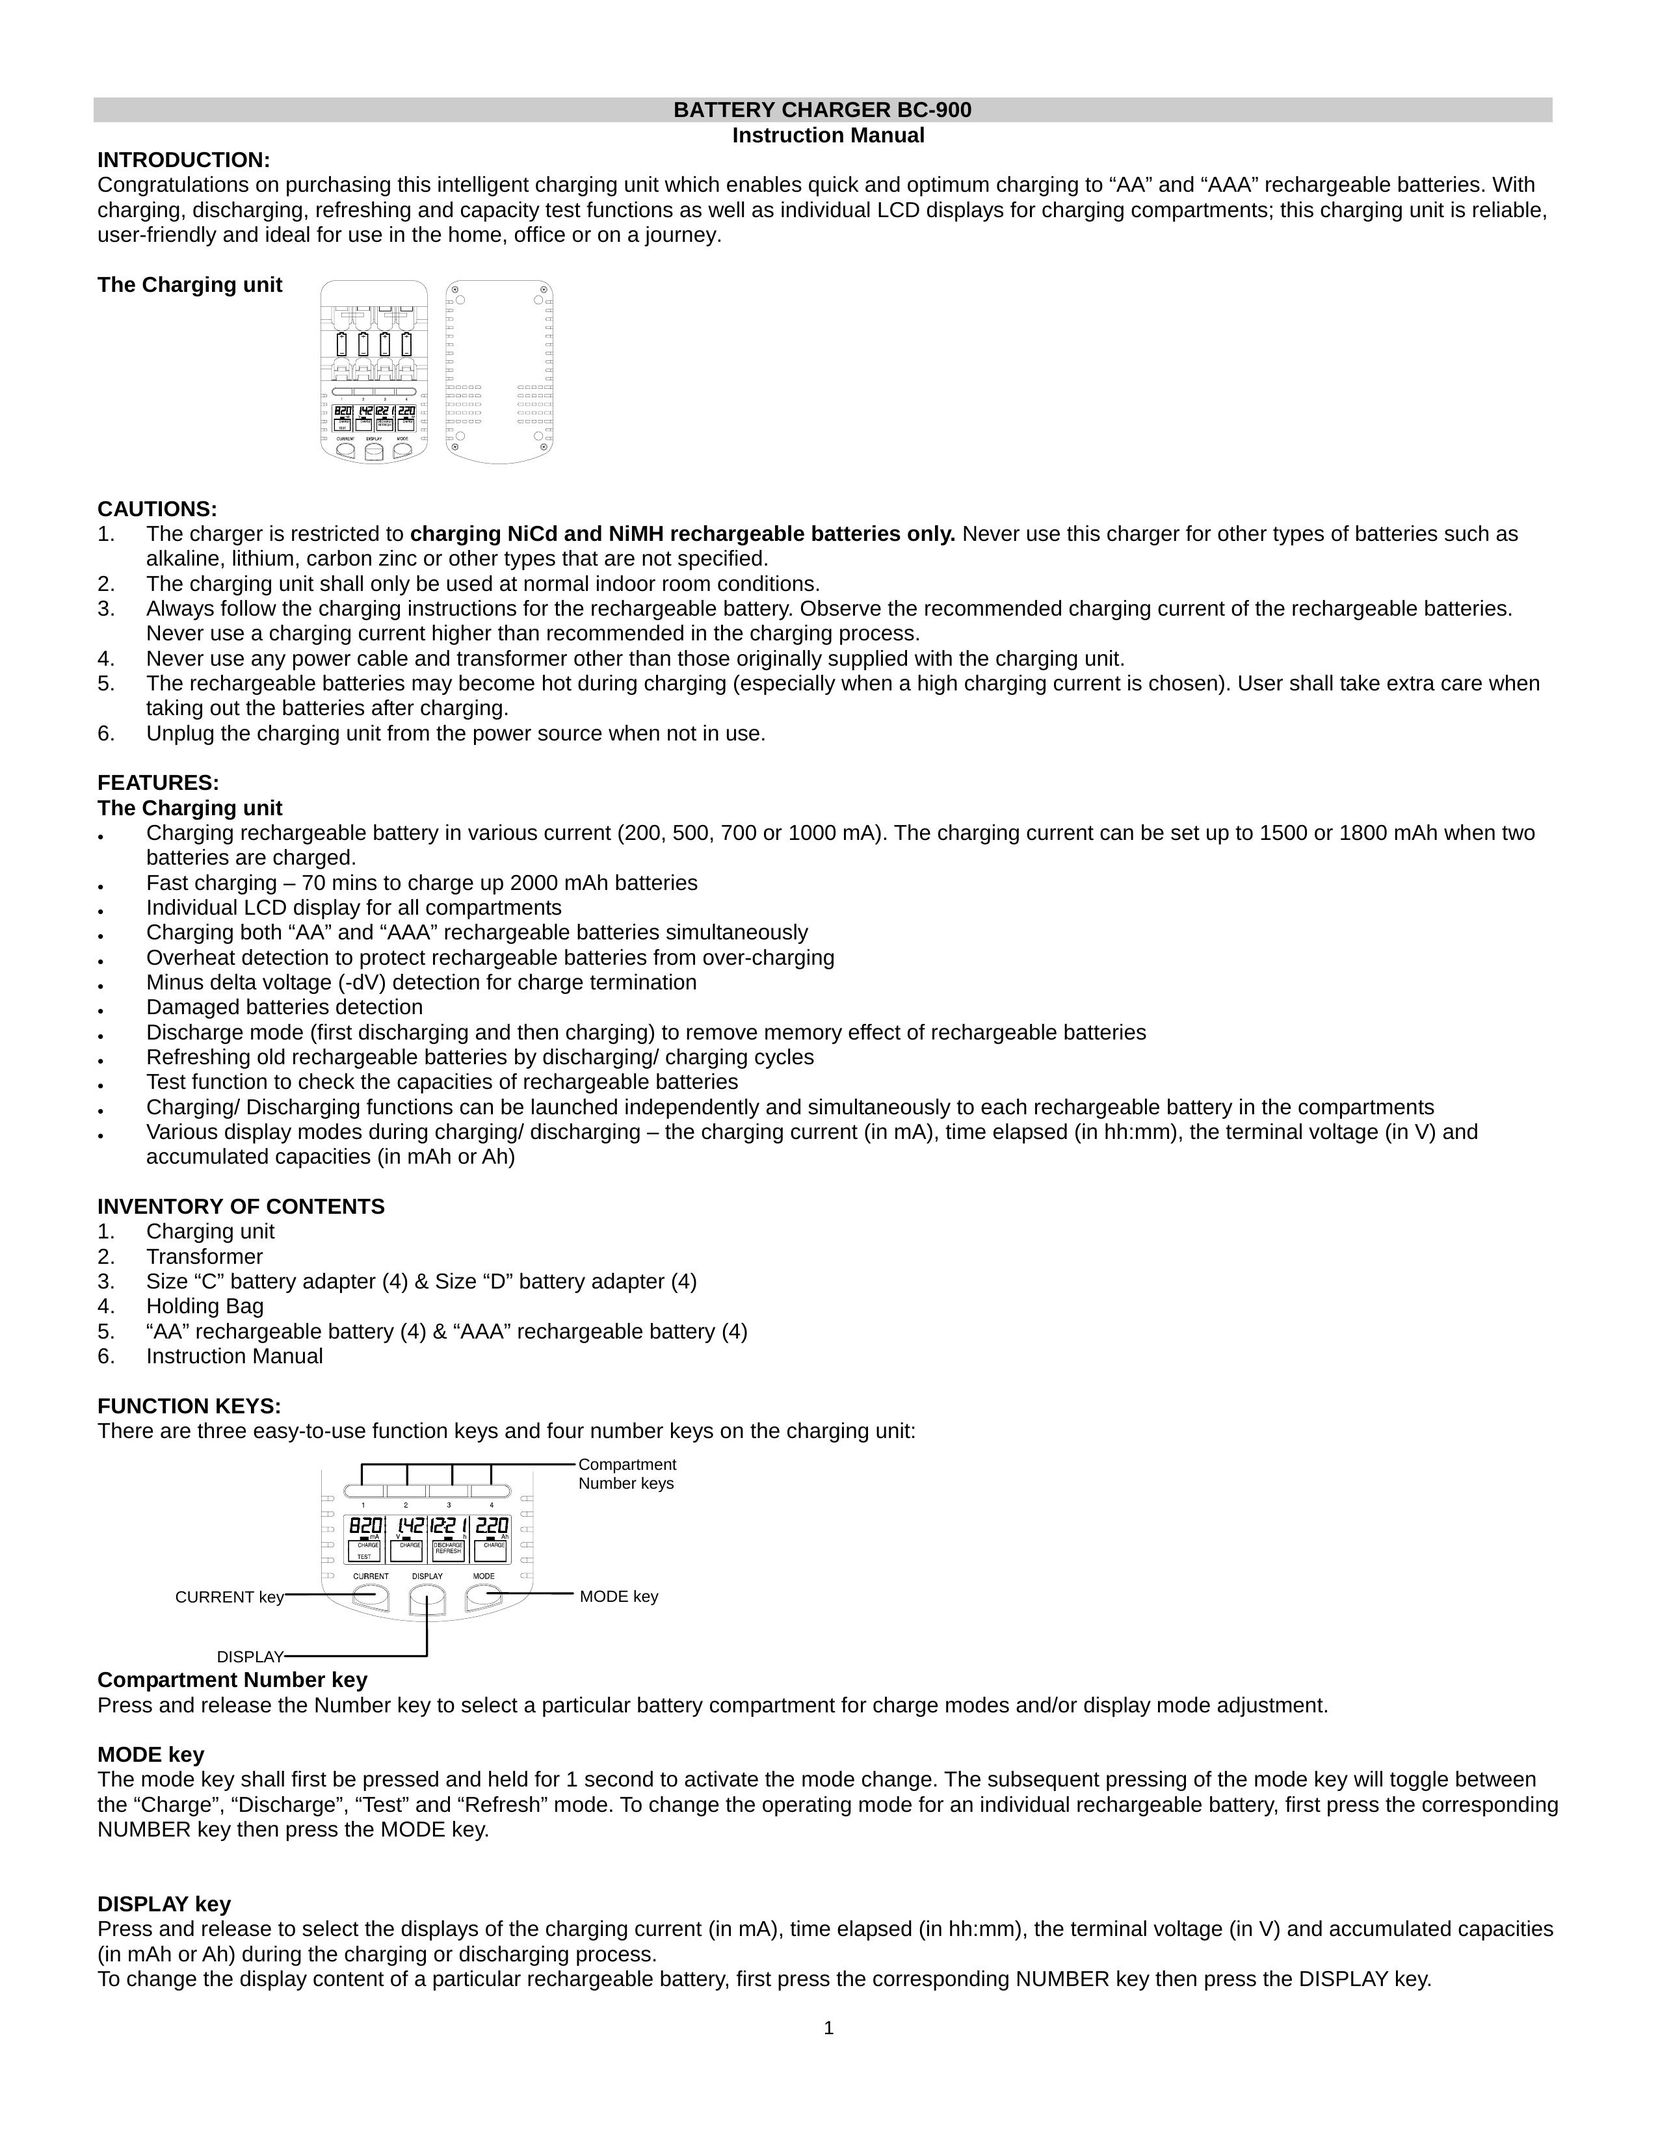 La Crosse Technology BC-900 Battery Charger User Manual